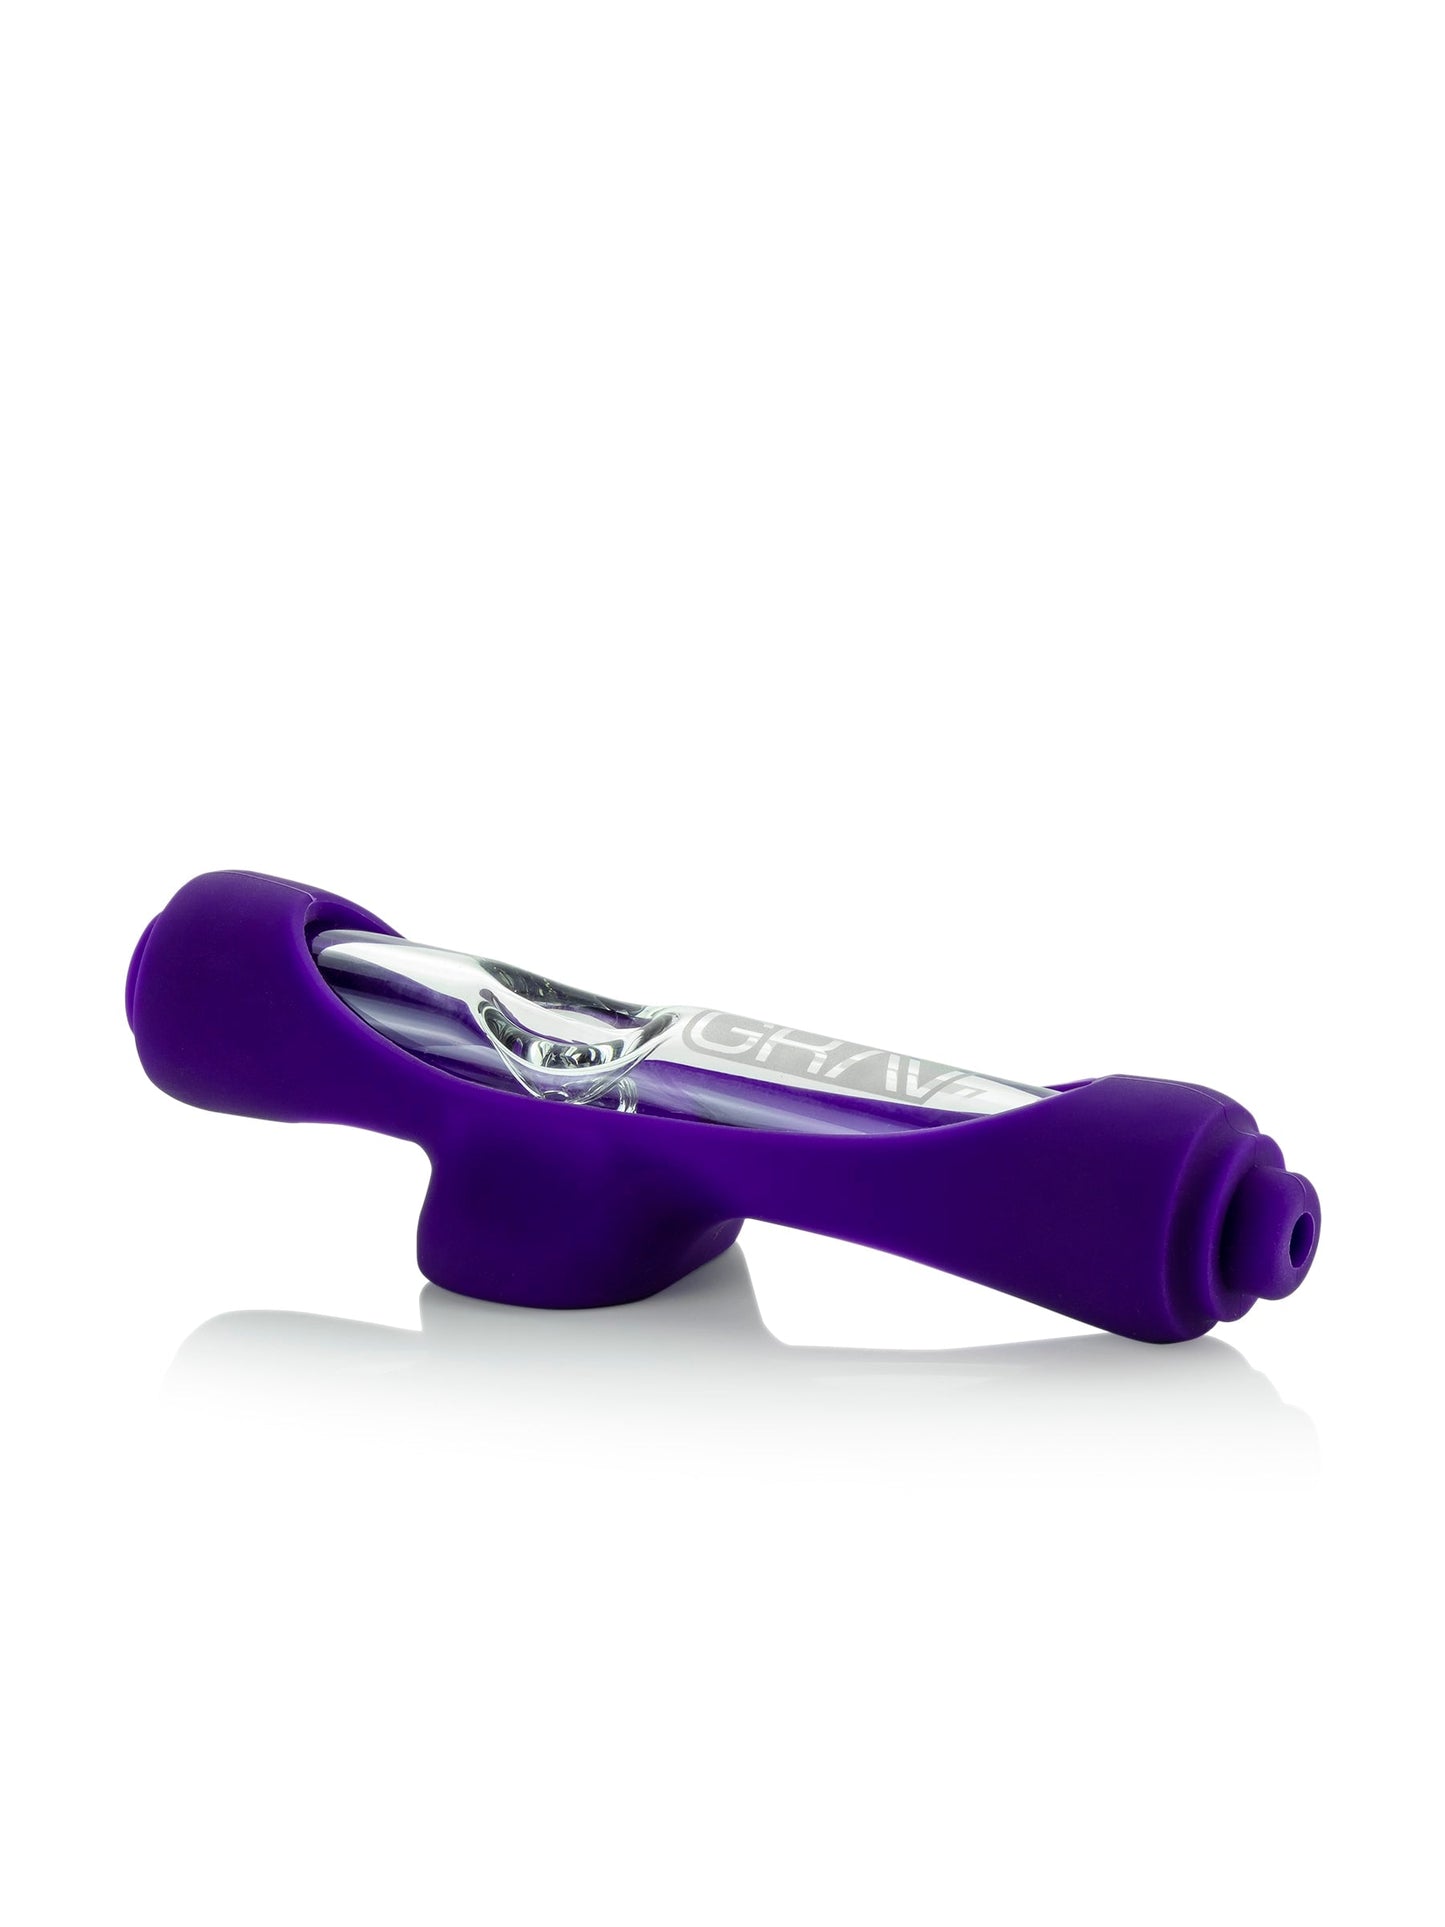 Mini Steamroller with Silicone Skin